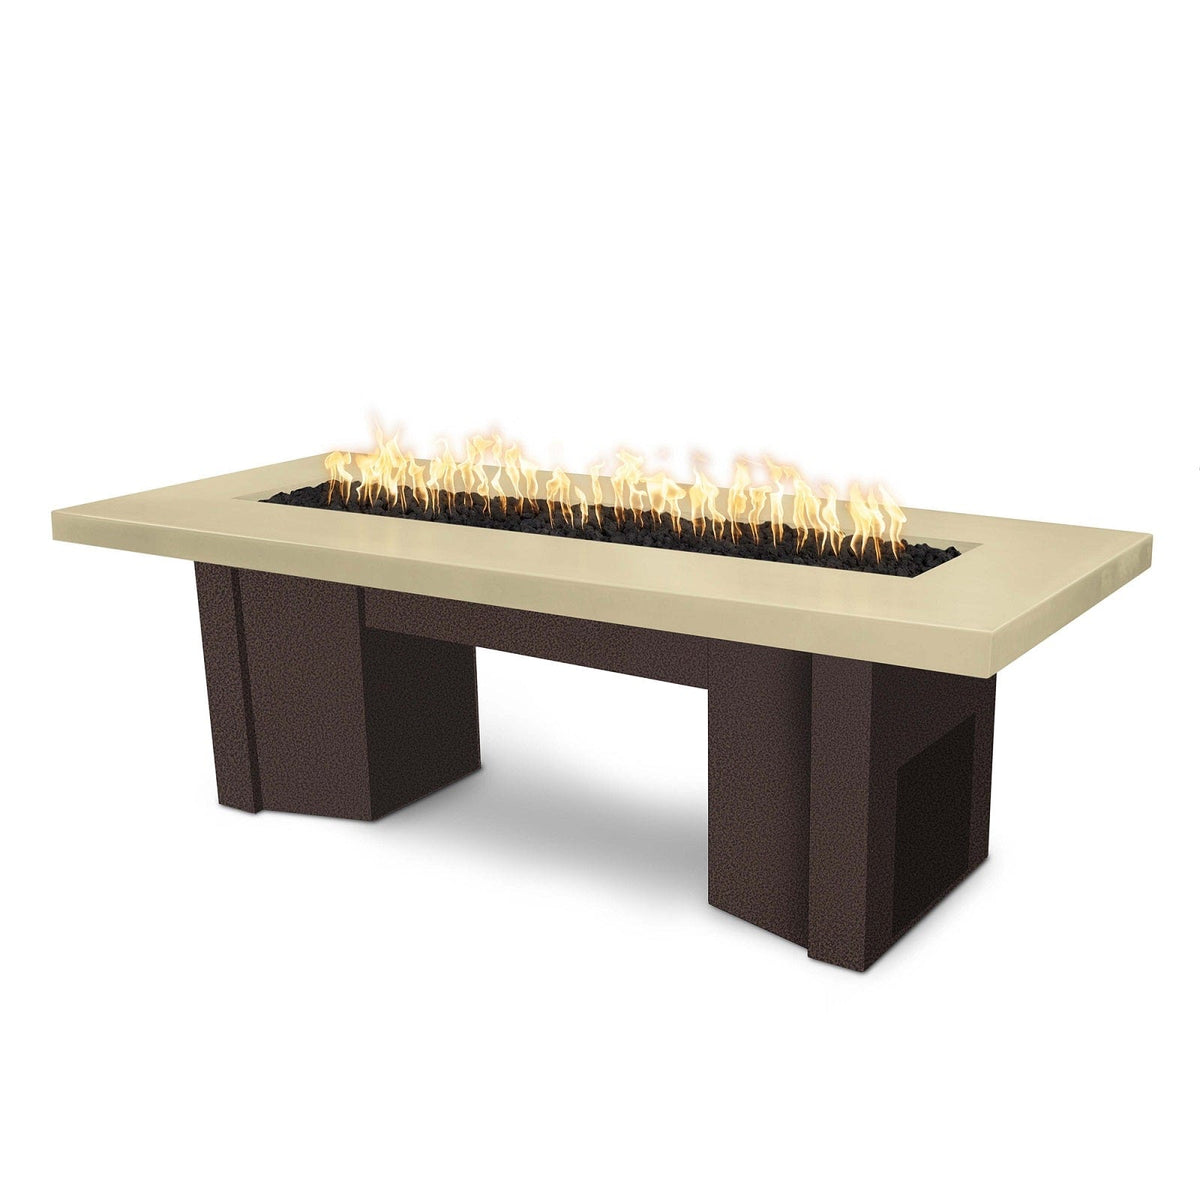 The Outdoor Plus Fire Features Vanilla (-VAN) / Copper Vein Powder Coated Steel (-CPV) The Outdoor Plus 78&quot; Alameda Fire Table Smooth Concrete in Natural Gas - Flame Sense System with Push Button Spark Igniter / OPT-ALMGFRC78FSEN-NG